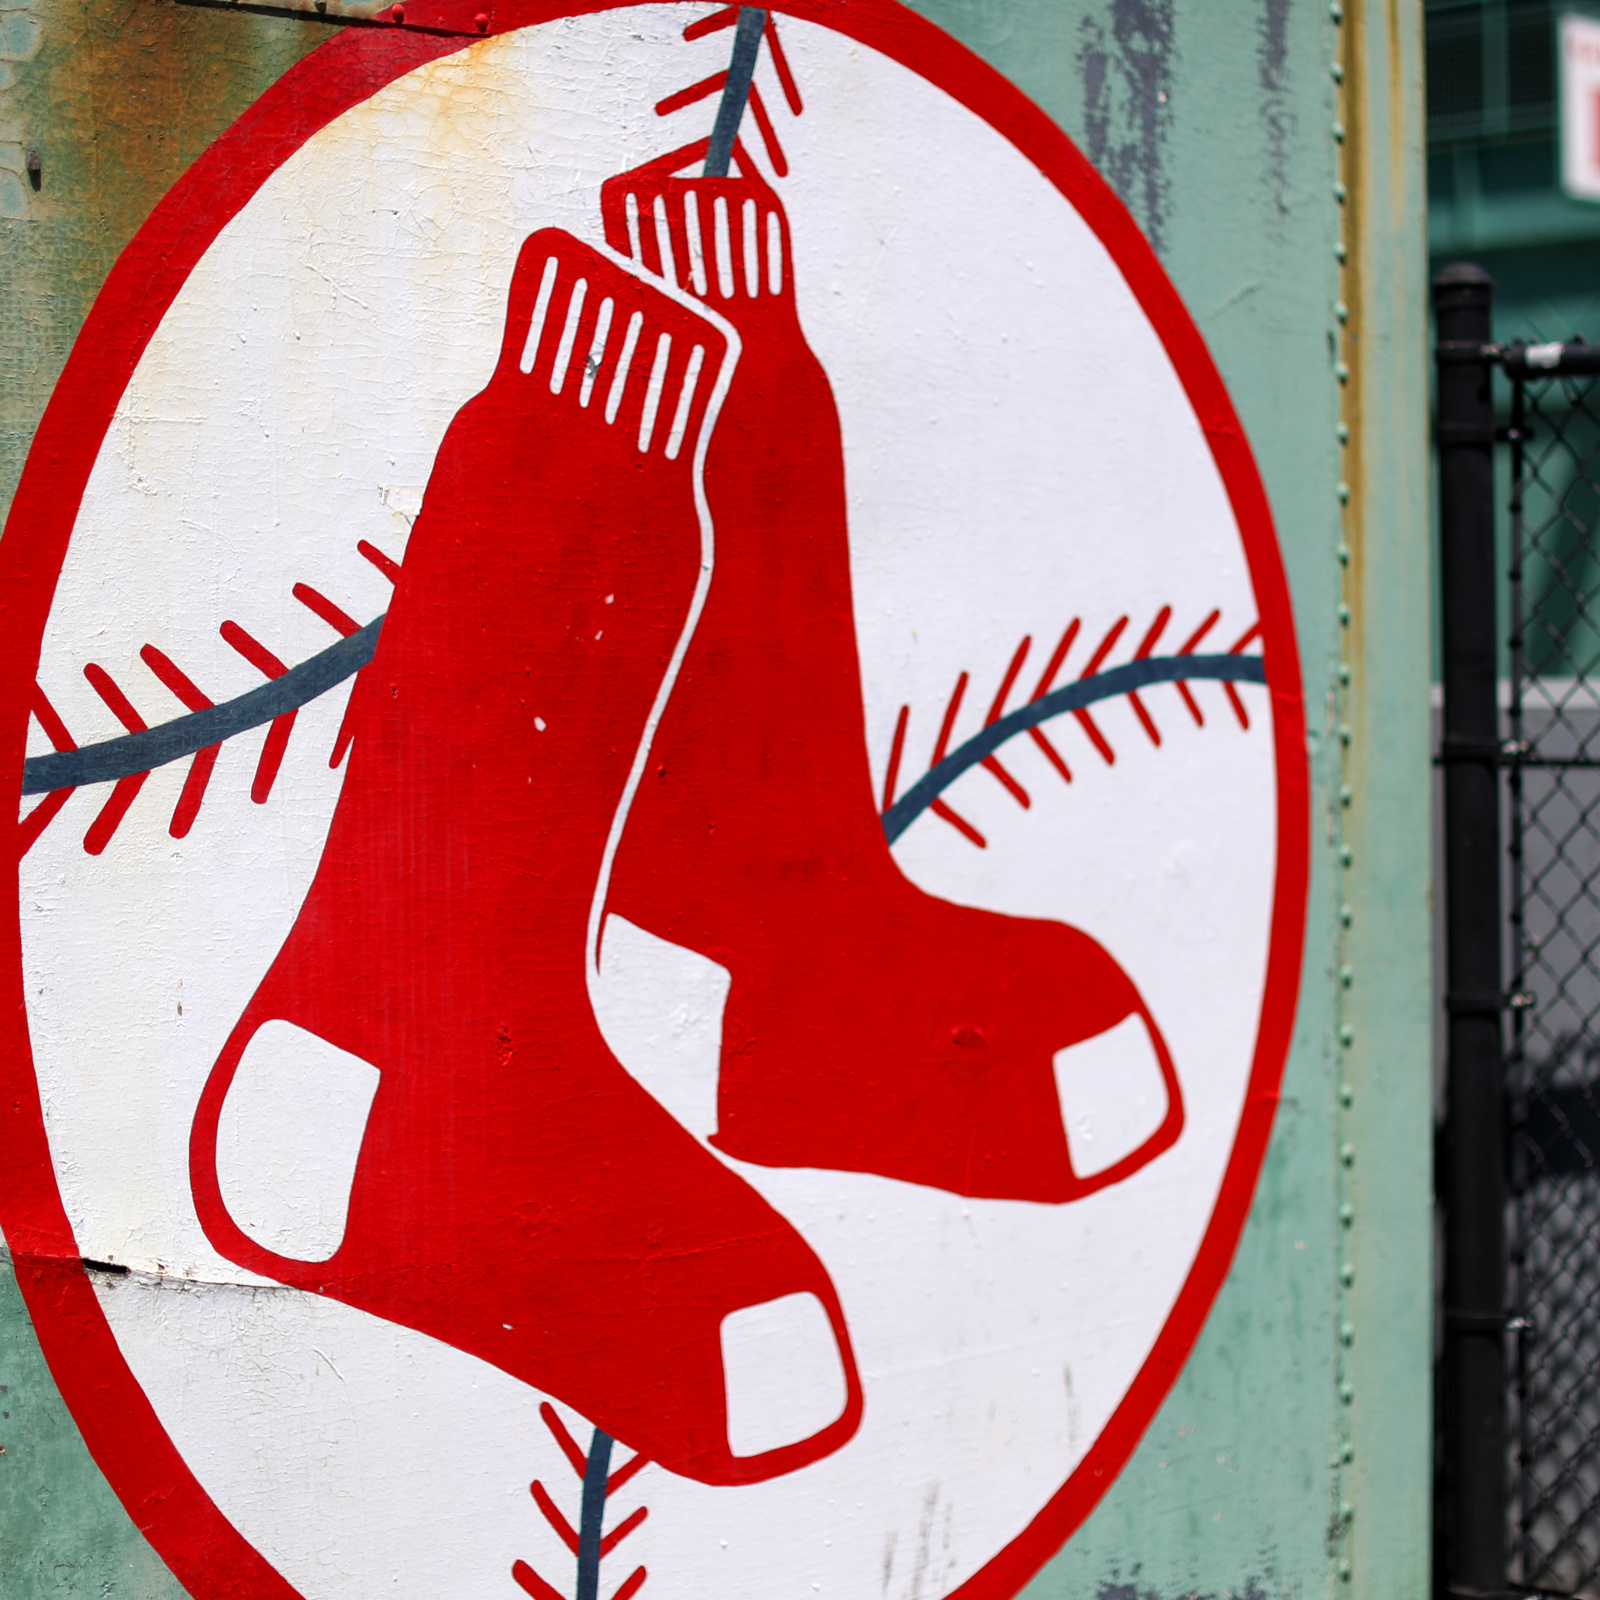 Red Sox release minor league player Brett Netzer after barrage of